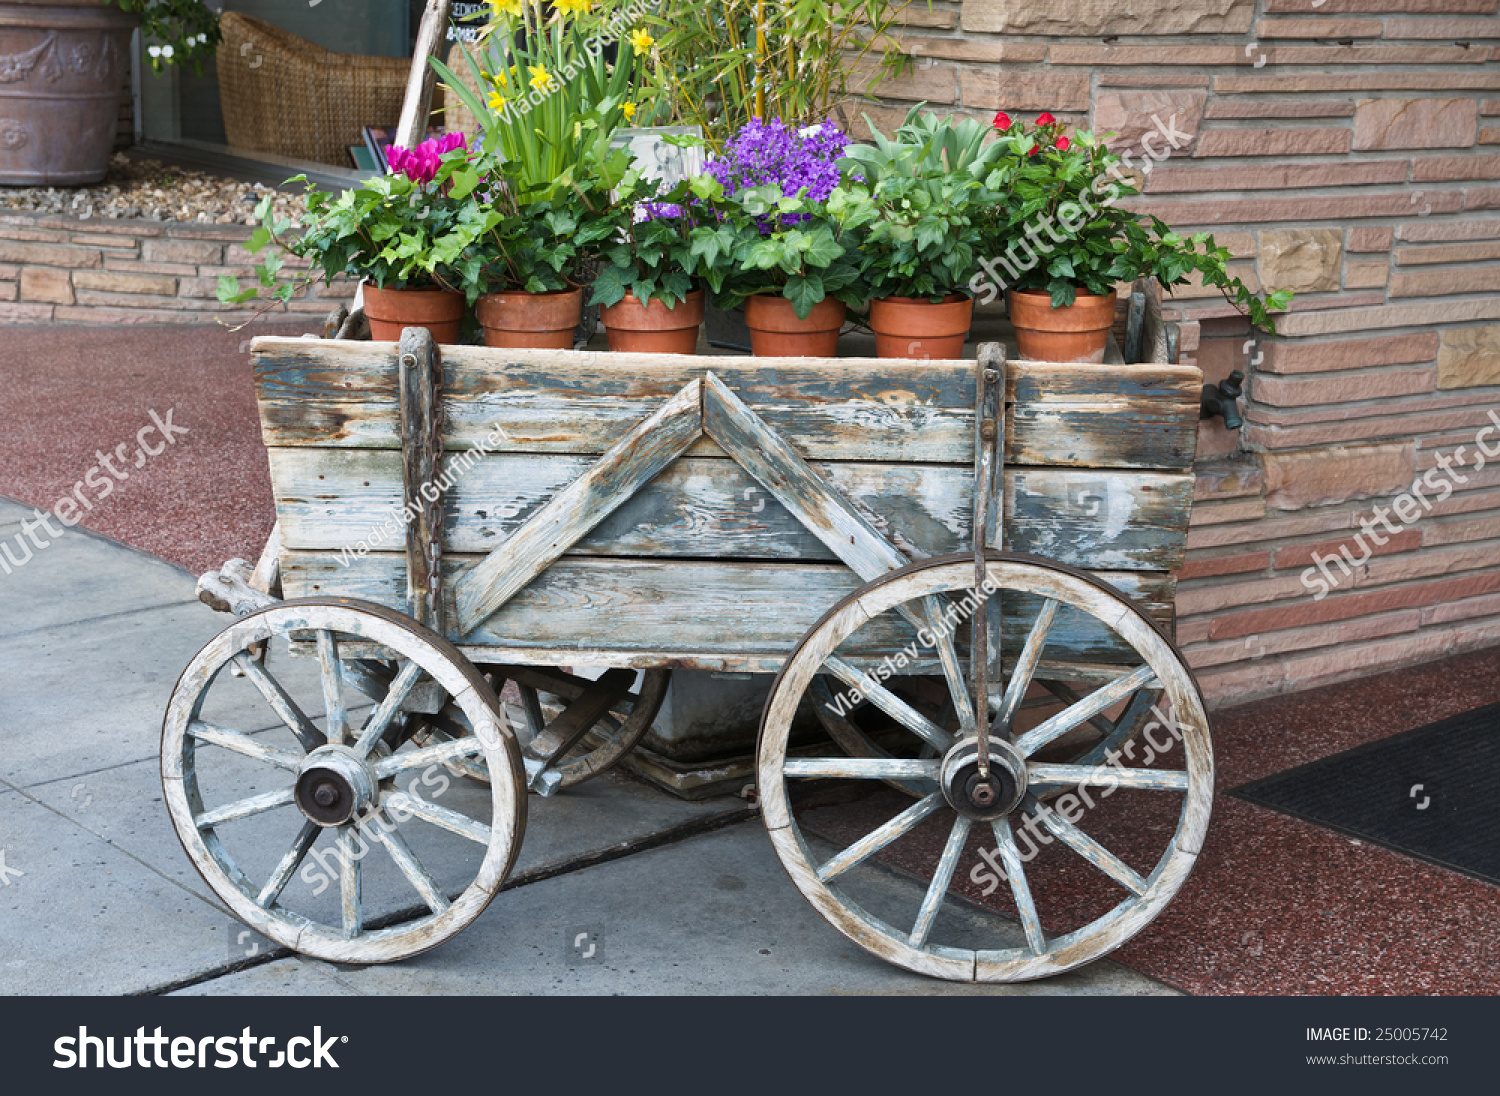 wooden wagons for sale